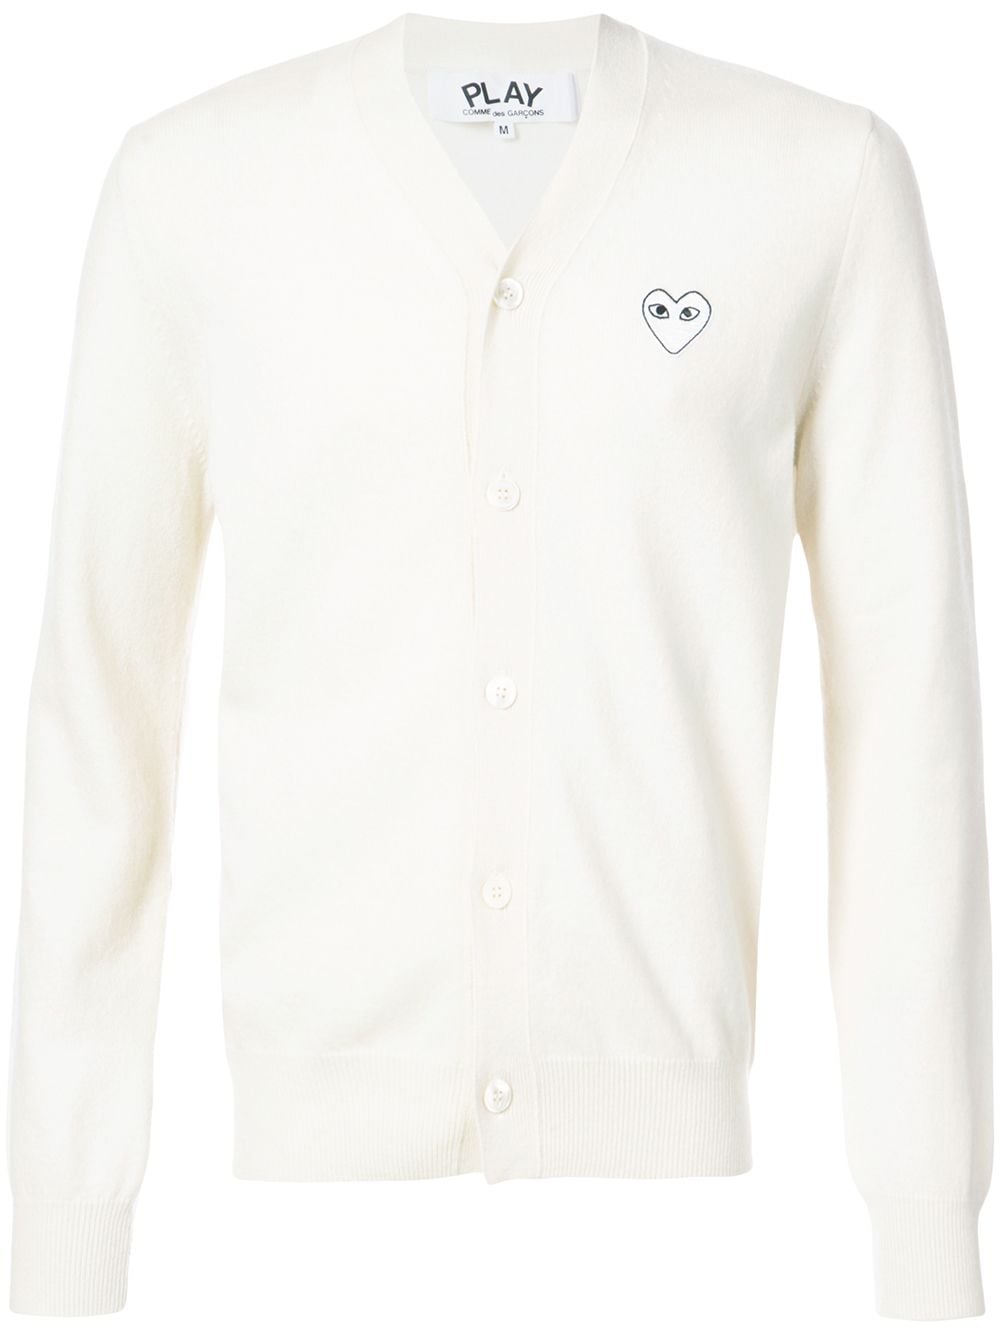 Comme Des Garçons Play cardigan with white heart von Comme Des Garçons Play